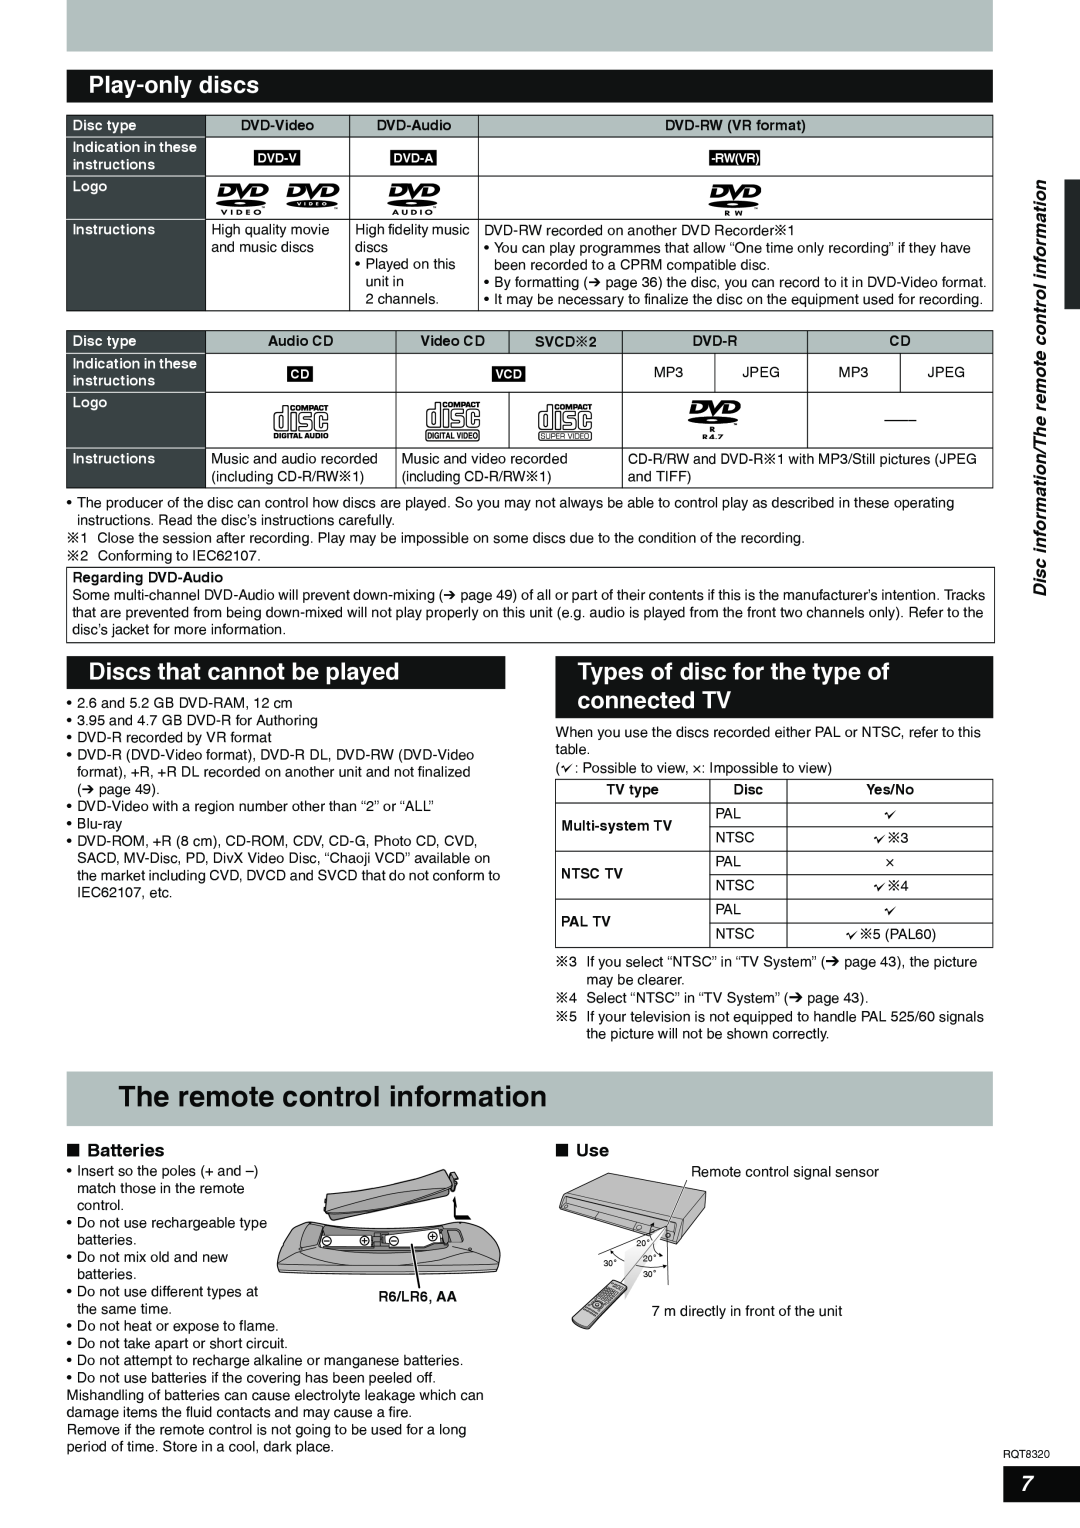 Panasonic DMR-ES15EB manual The remote control information, Play-only discs, Discs that cannot be played 